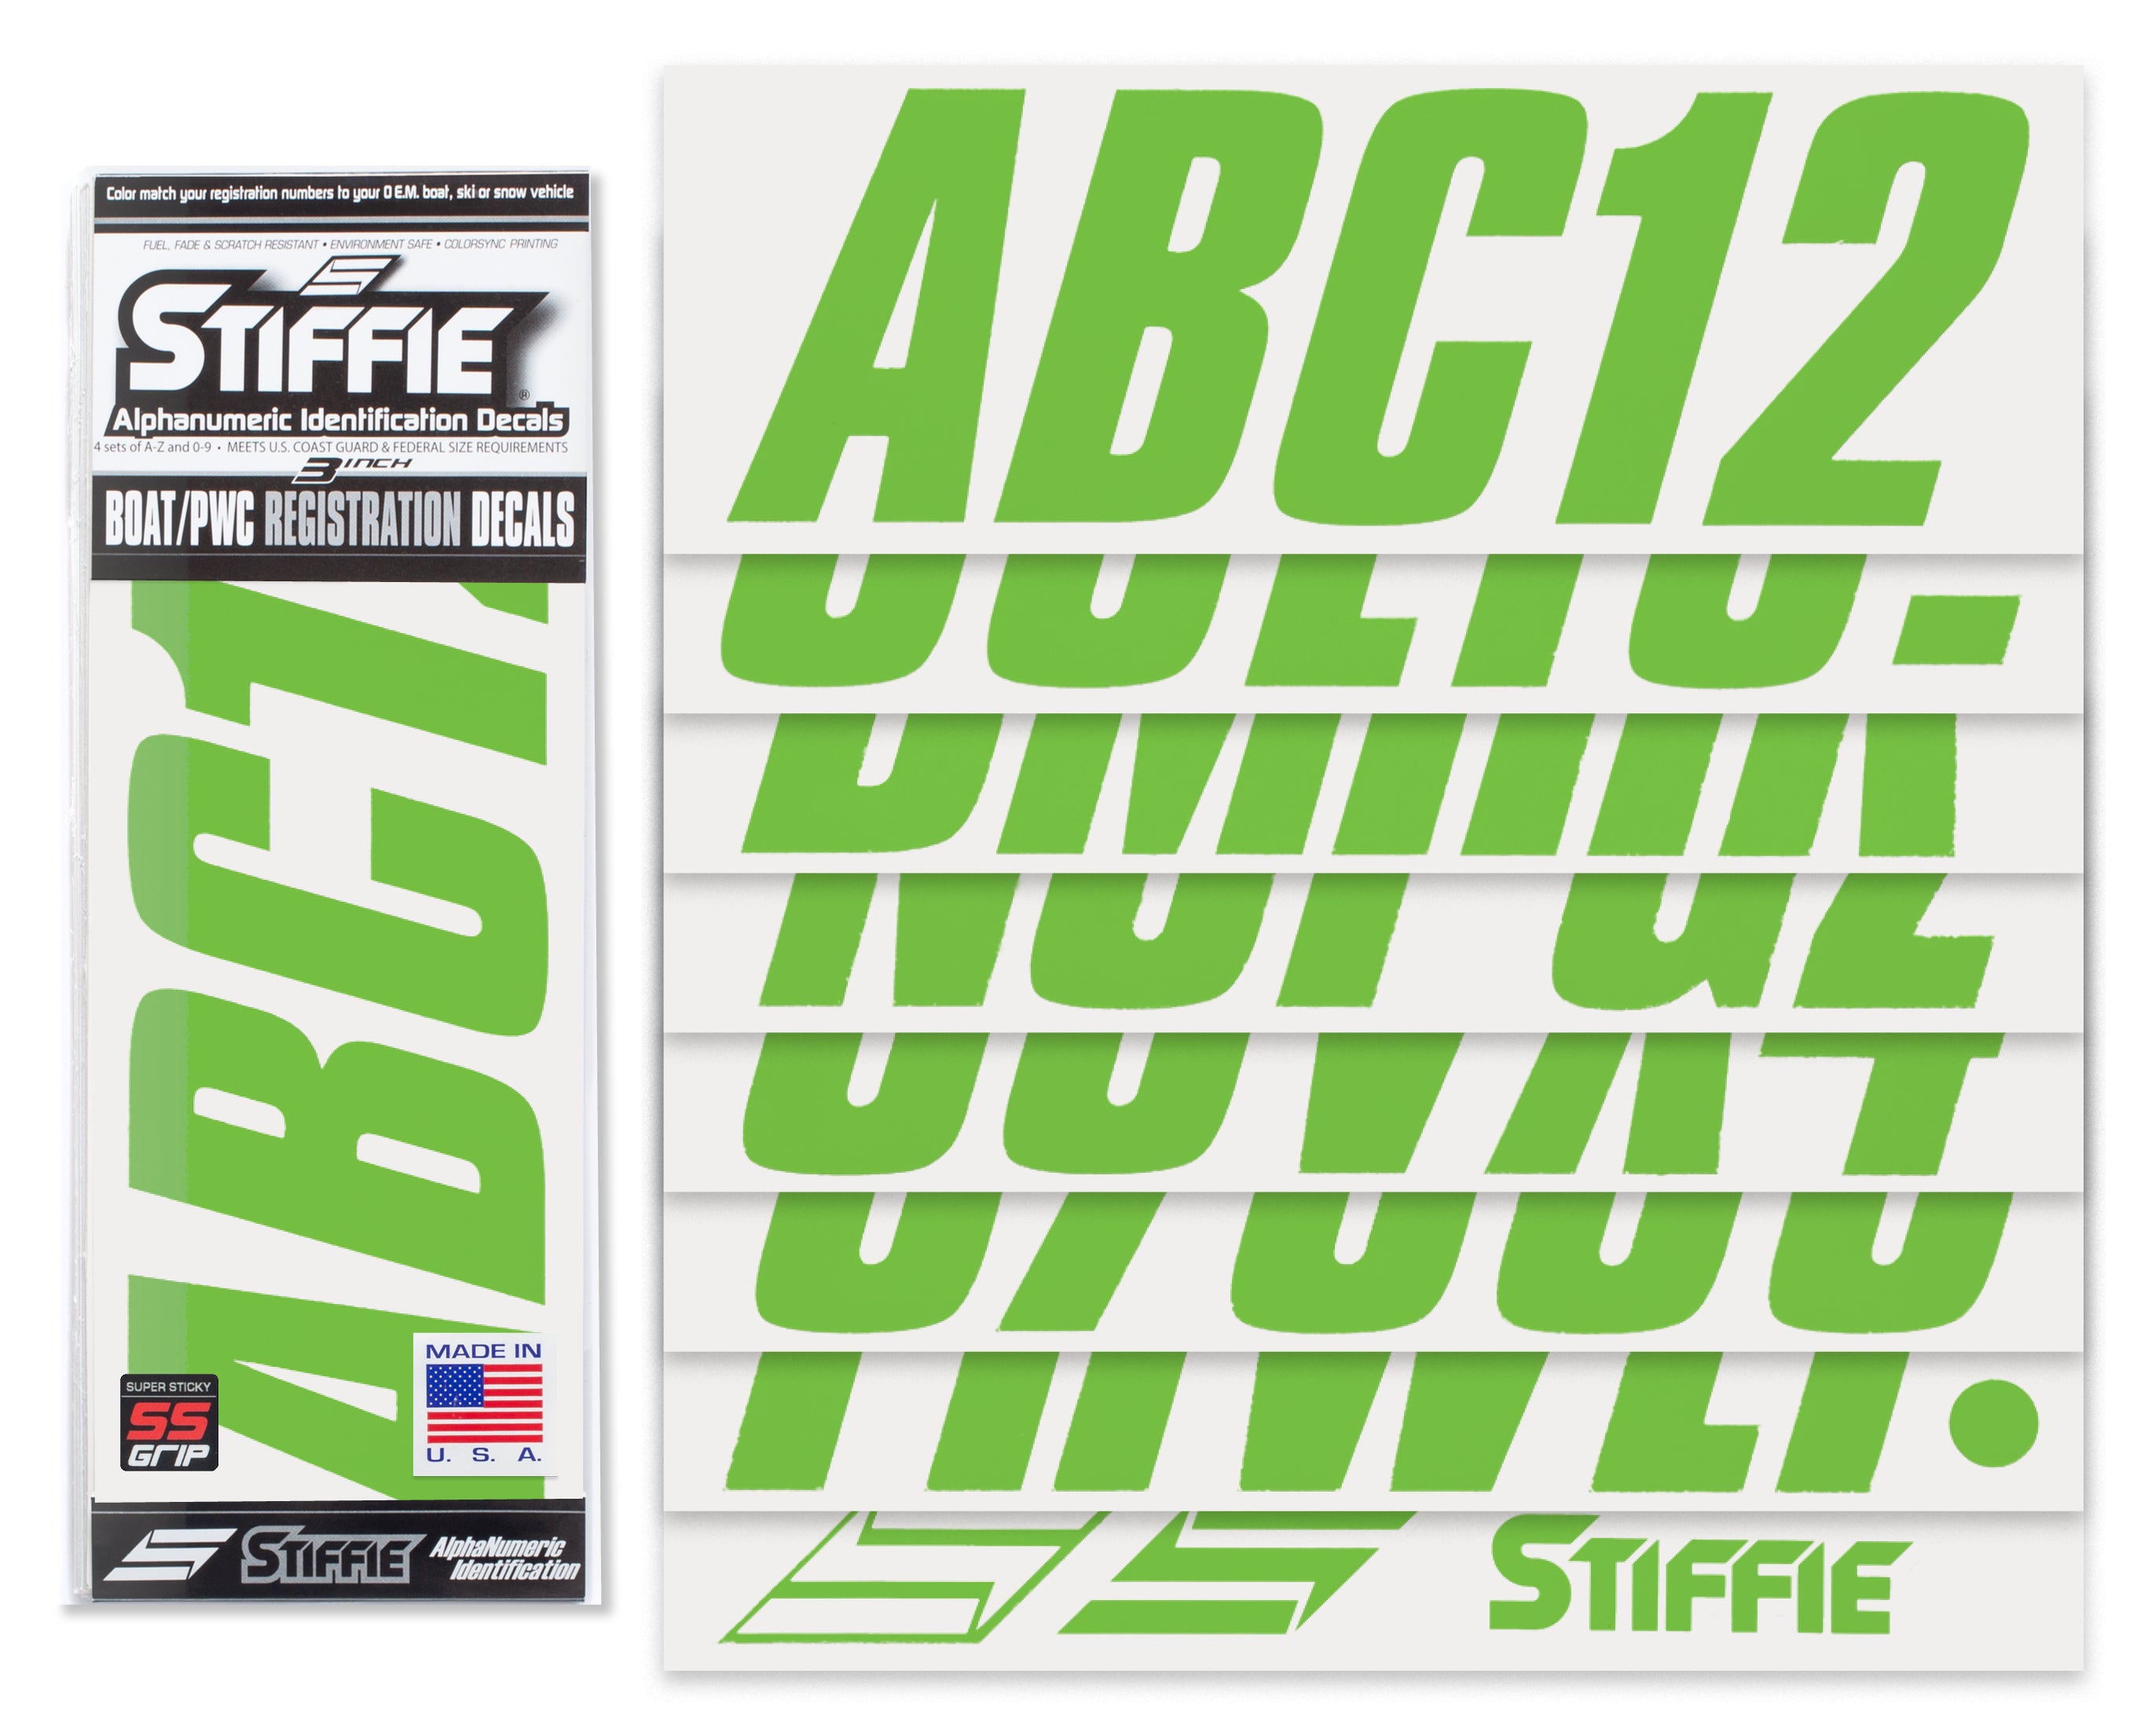 STIFFIE Shift Team Green Super Sticky 3" Alpha Numeric Registration Identification Numbers Stickers Decals for Sea-Doo Spark, Inflatable Boats, Ribs, Hypalon/PVC, PWC and Boats.